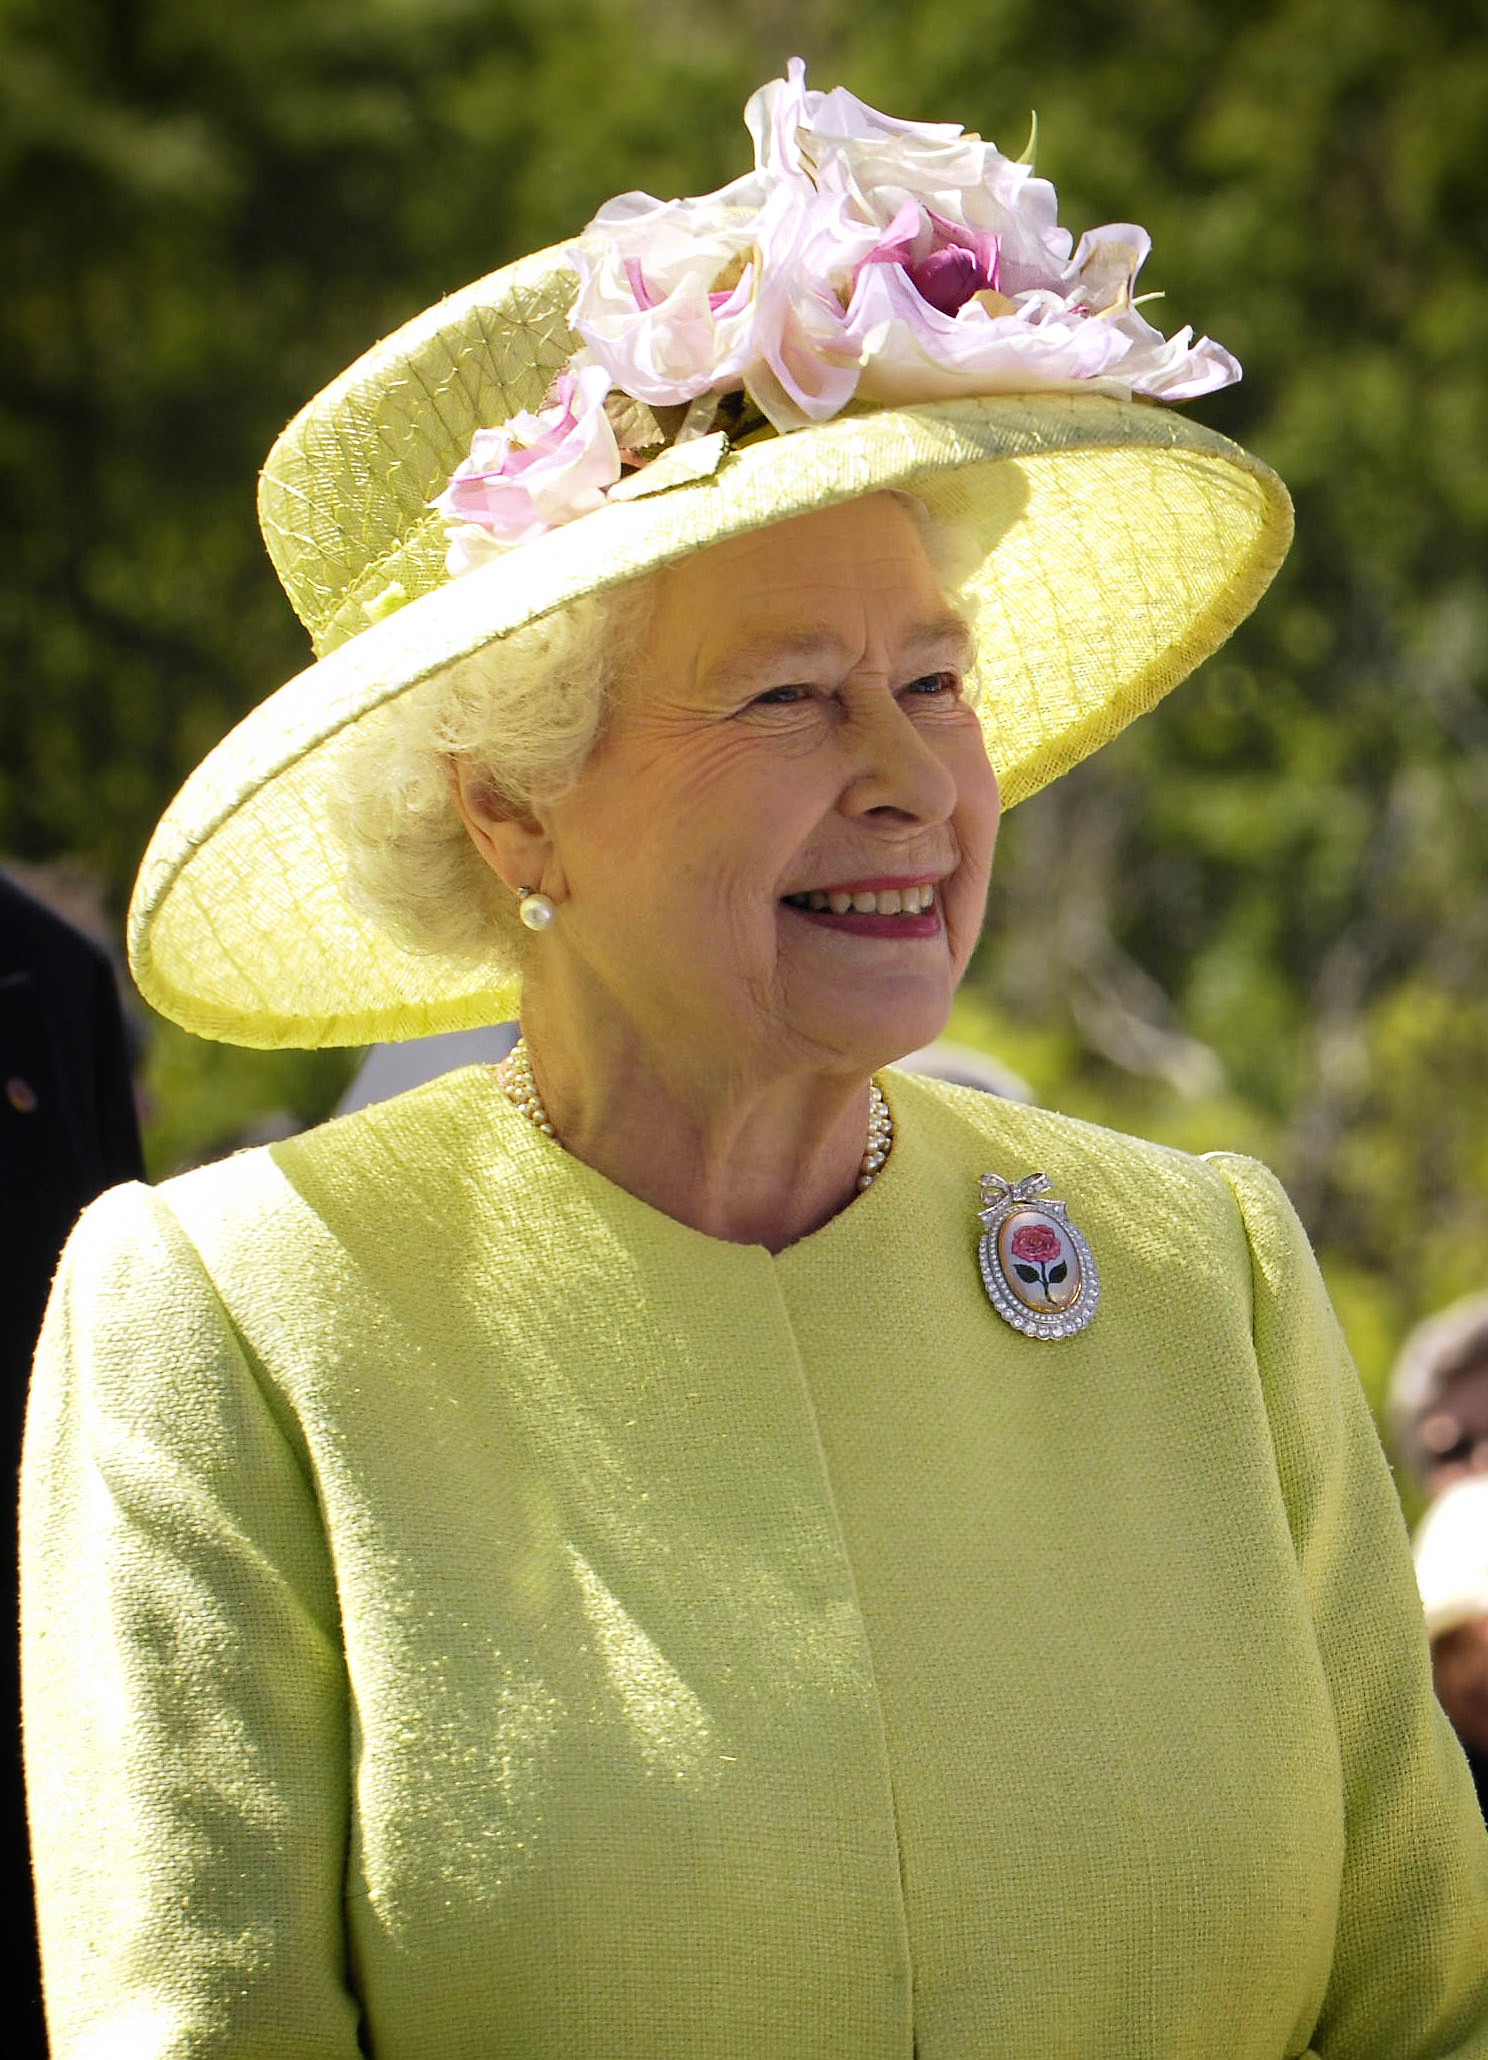 Bank holiday confirmed for date of The Queen’s funeral